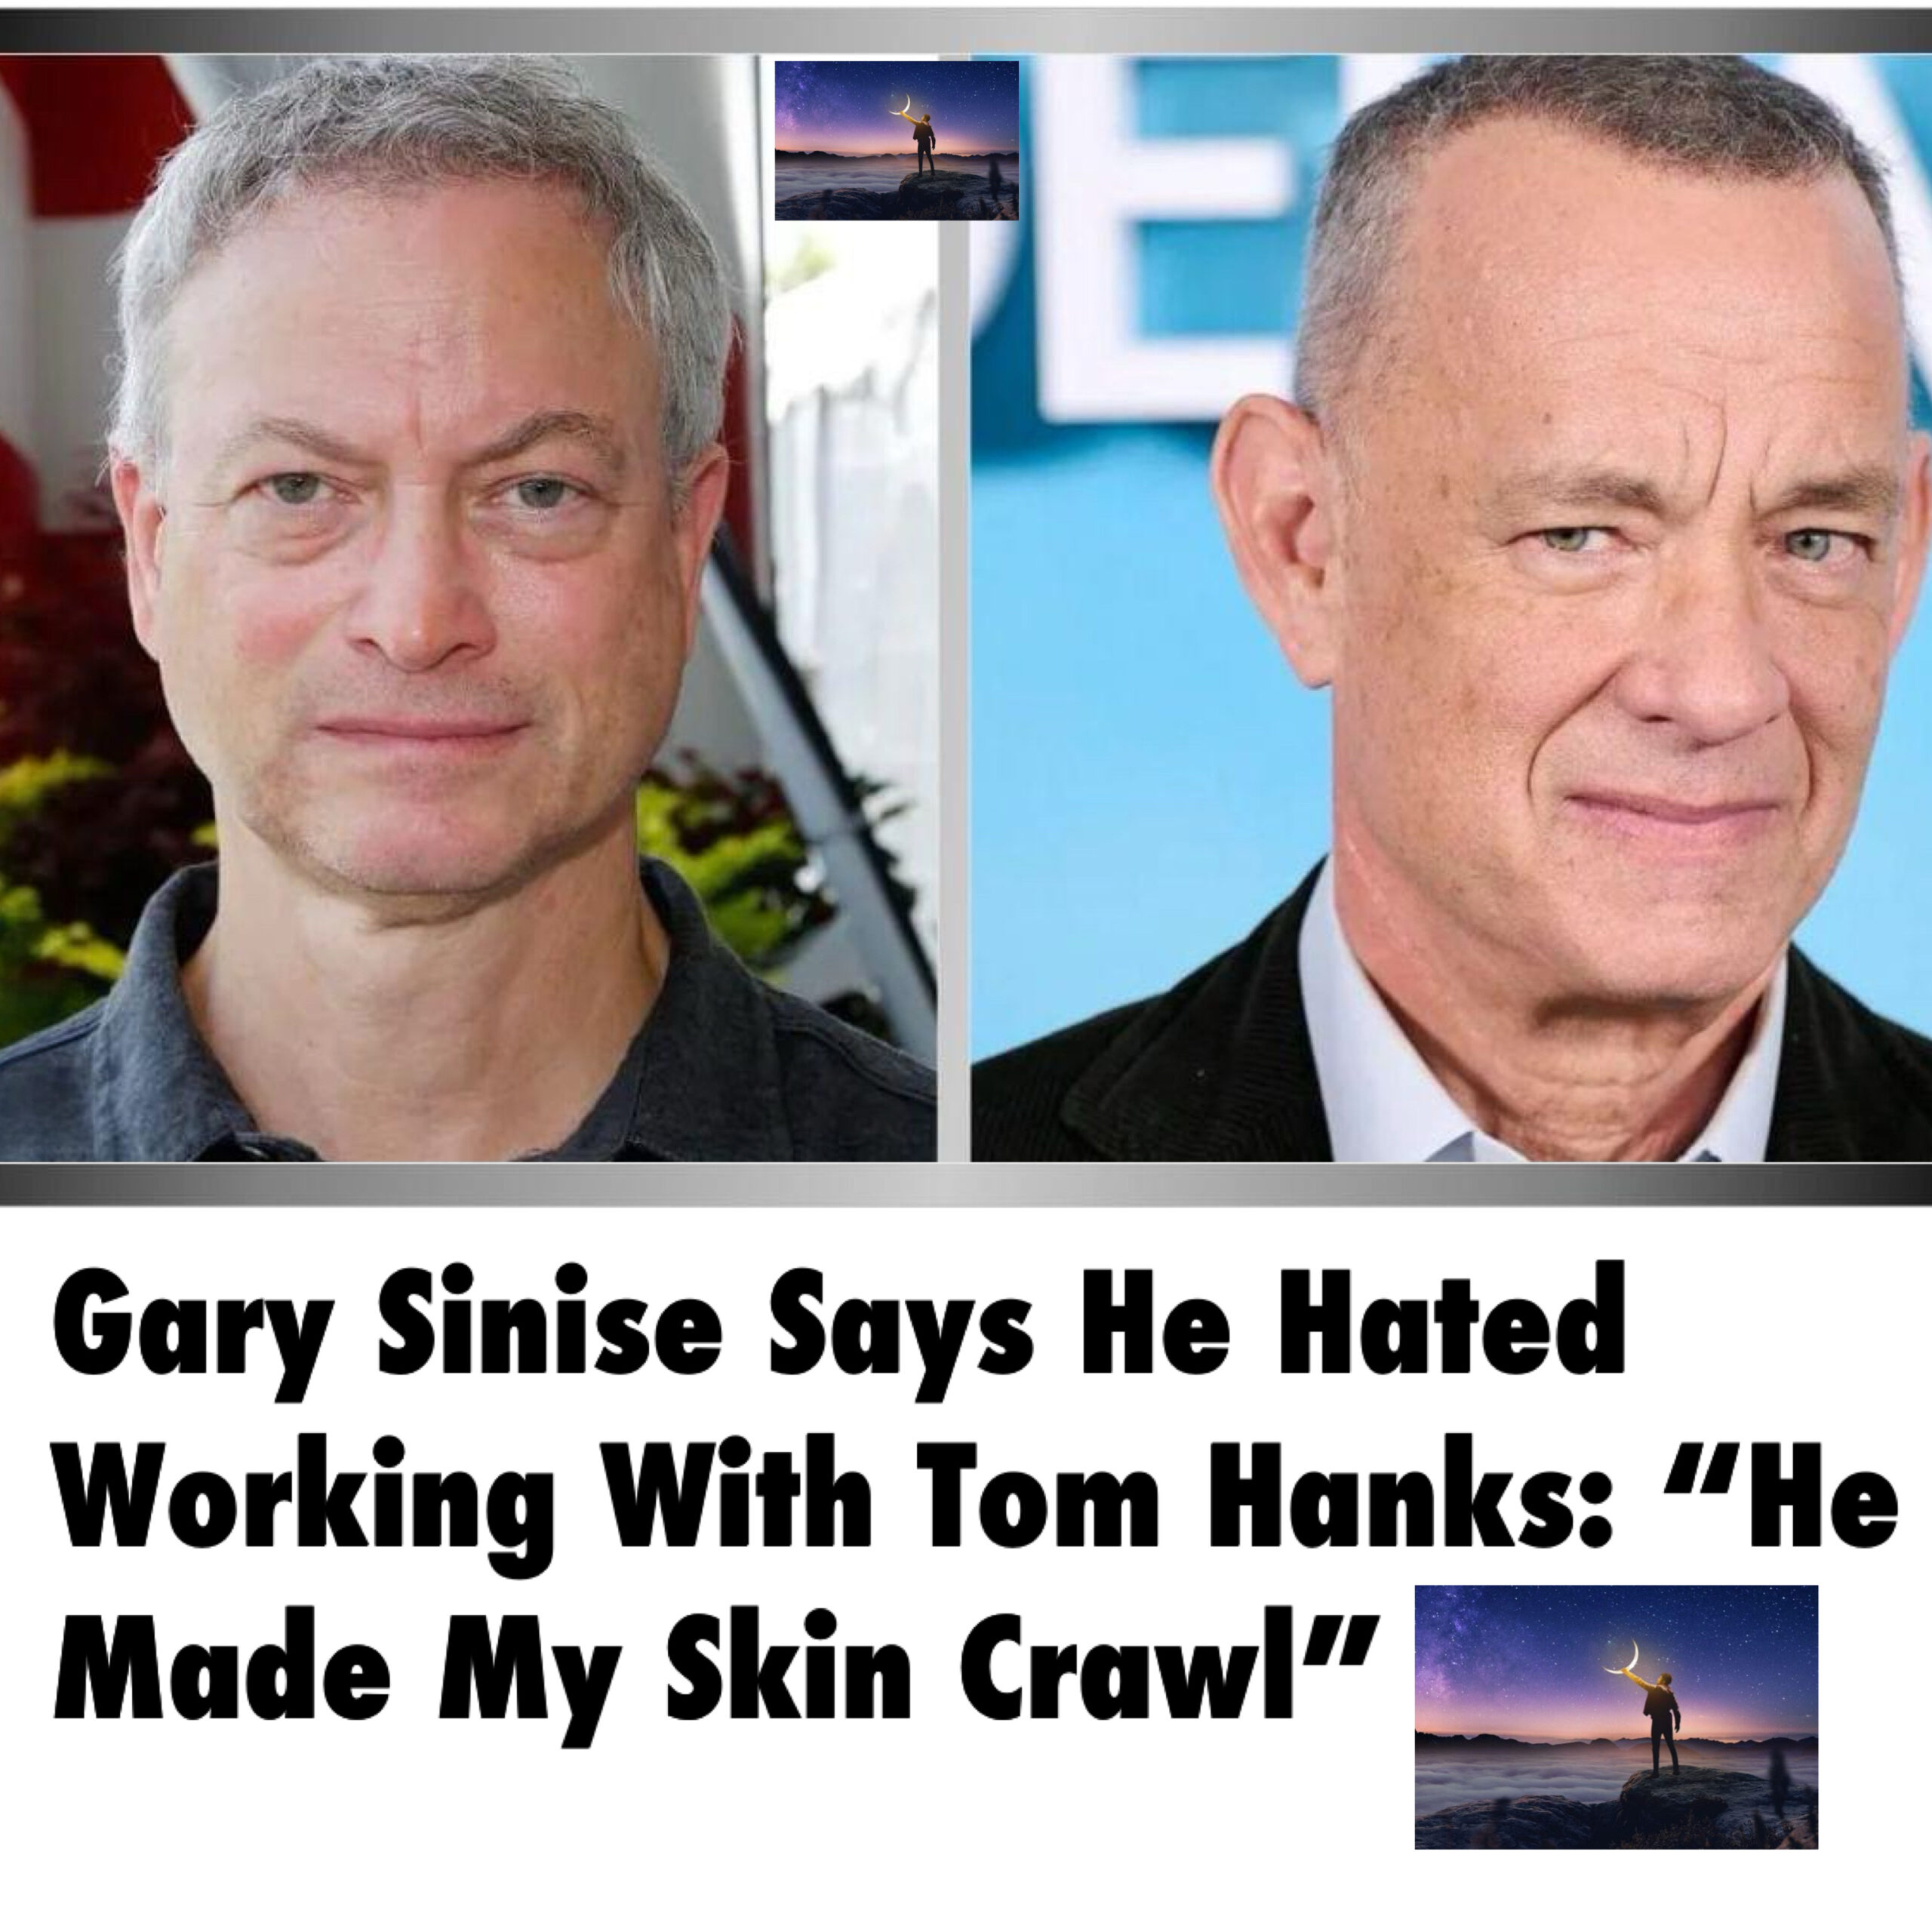 Gary Sinise Says He Hated Working With Tom Hanks: “He Made My Skin Crawl”